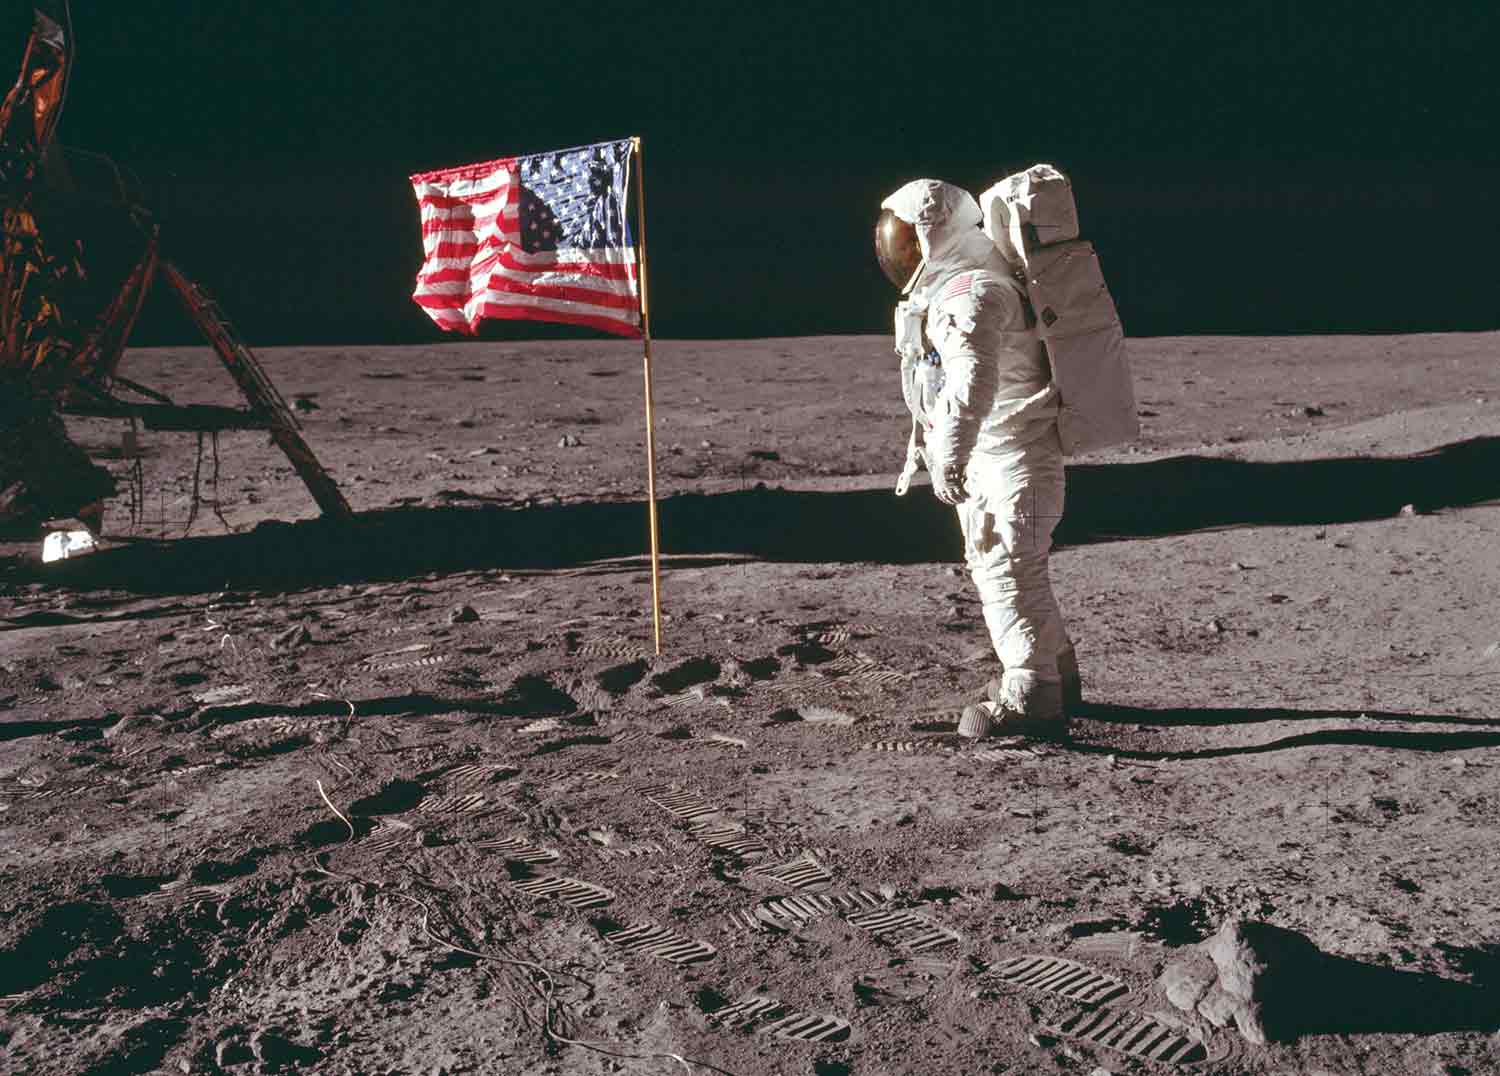 A person in a spacesuit stands on the surface of the Moon next to a U.S. flag, which stands upright in the soil.